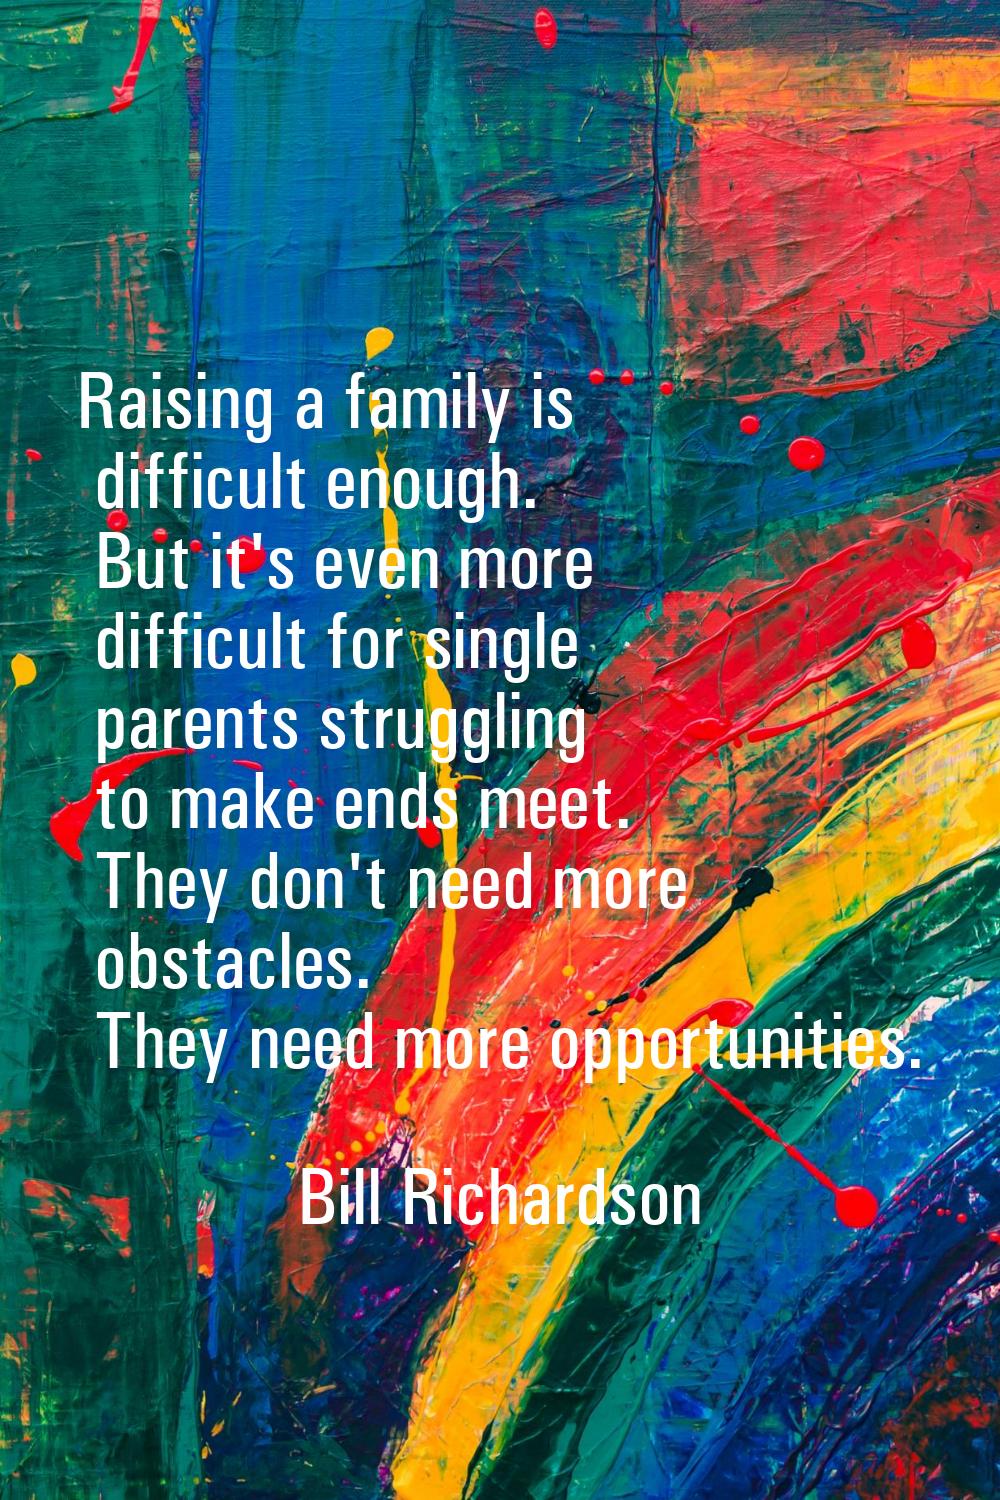 Raising a family is difficult enough. But it's even more difficult for single parents struggling to